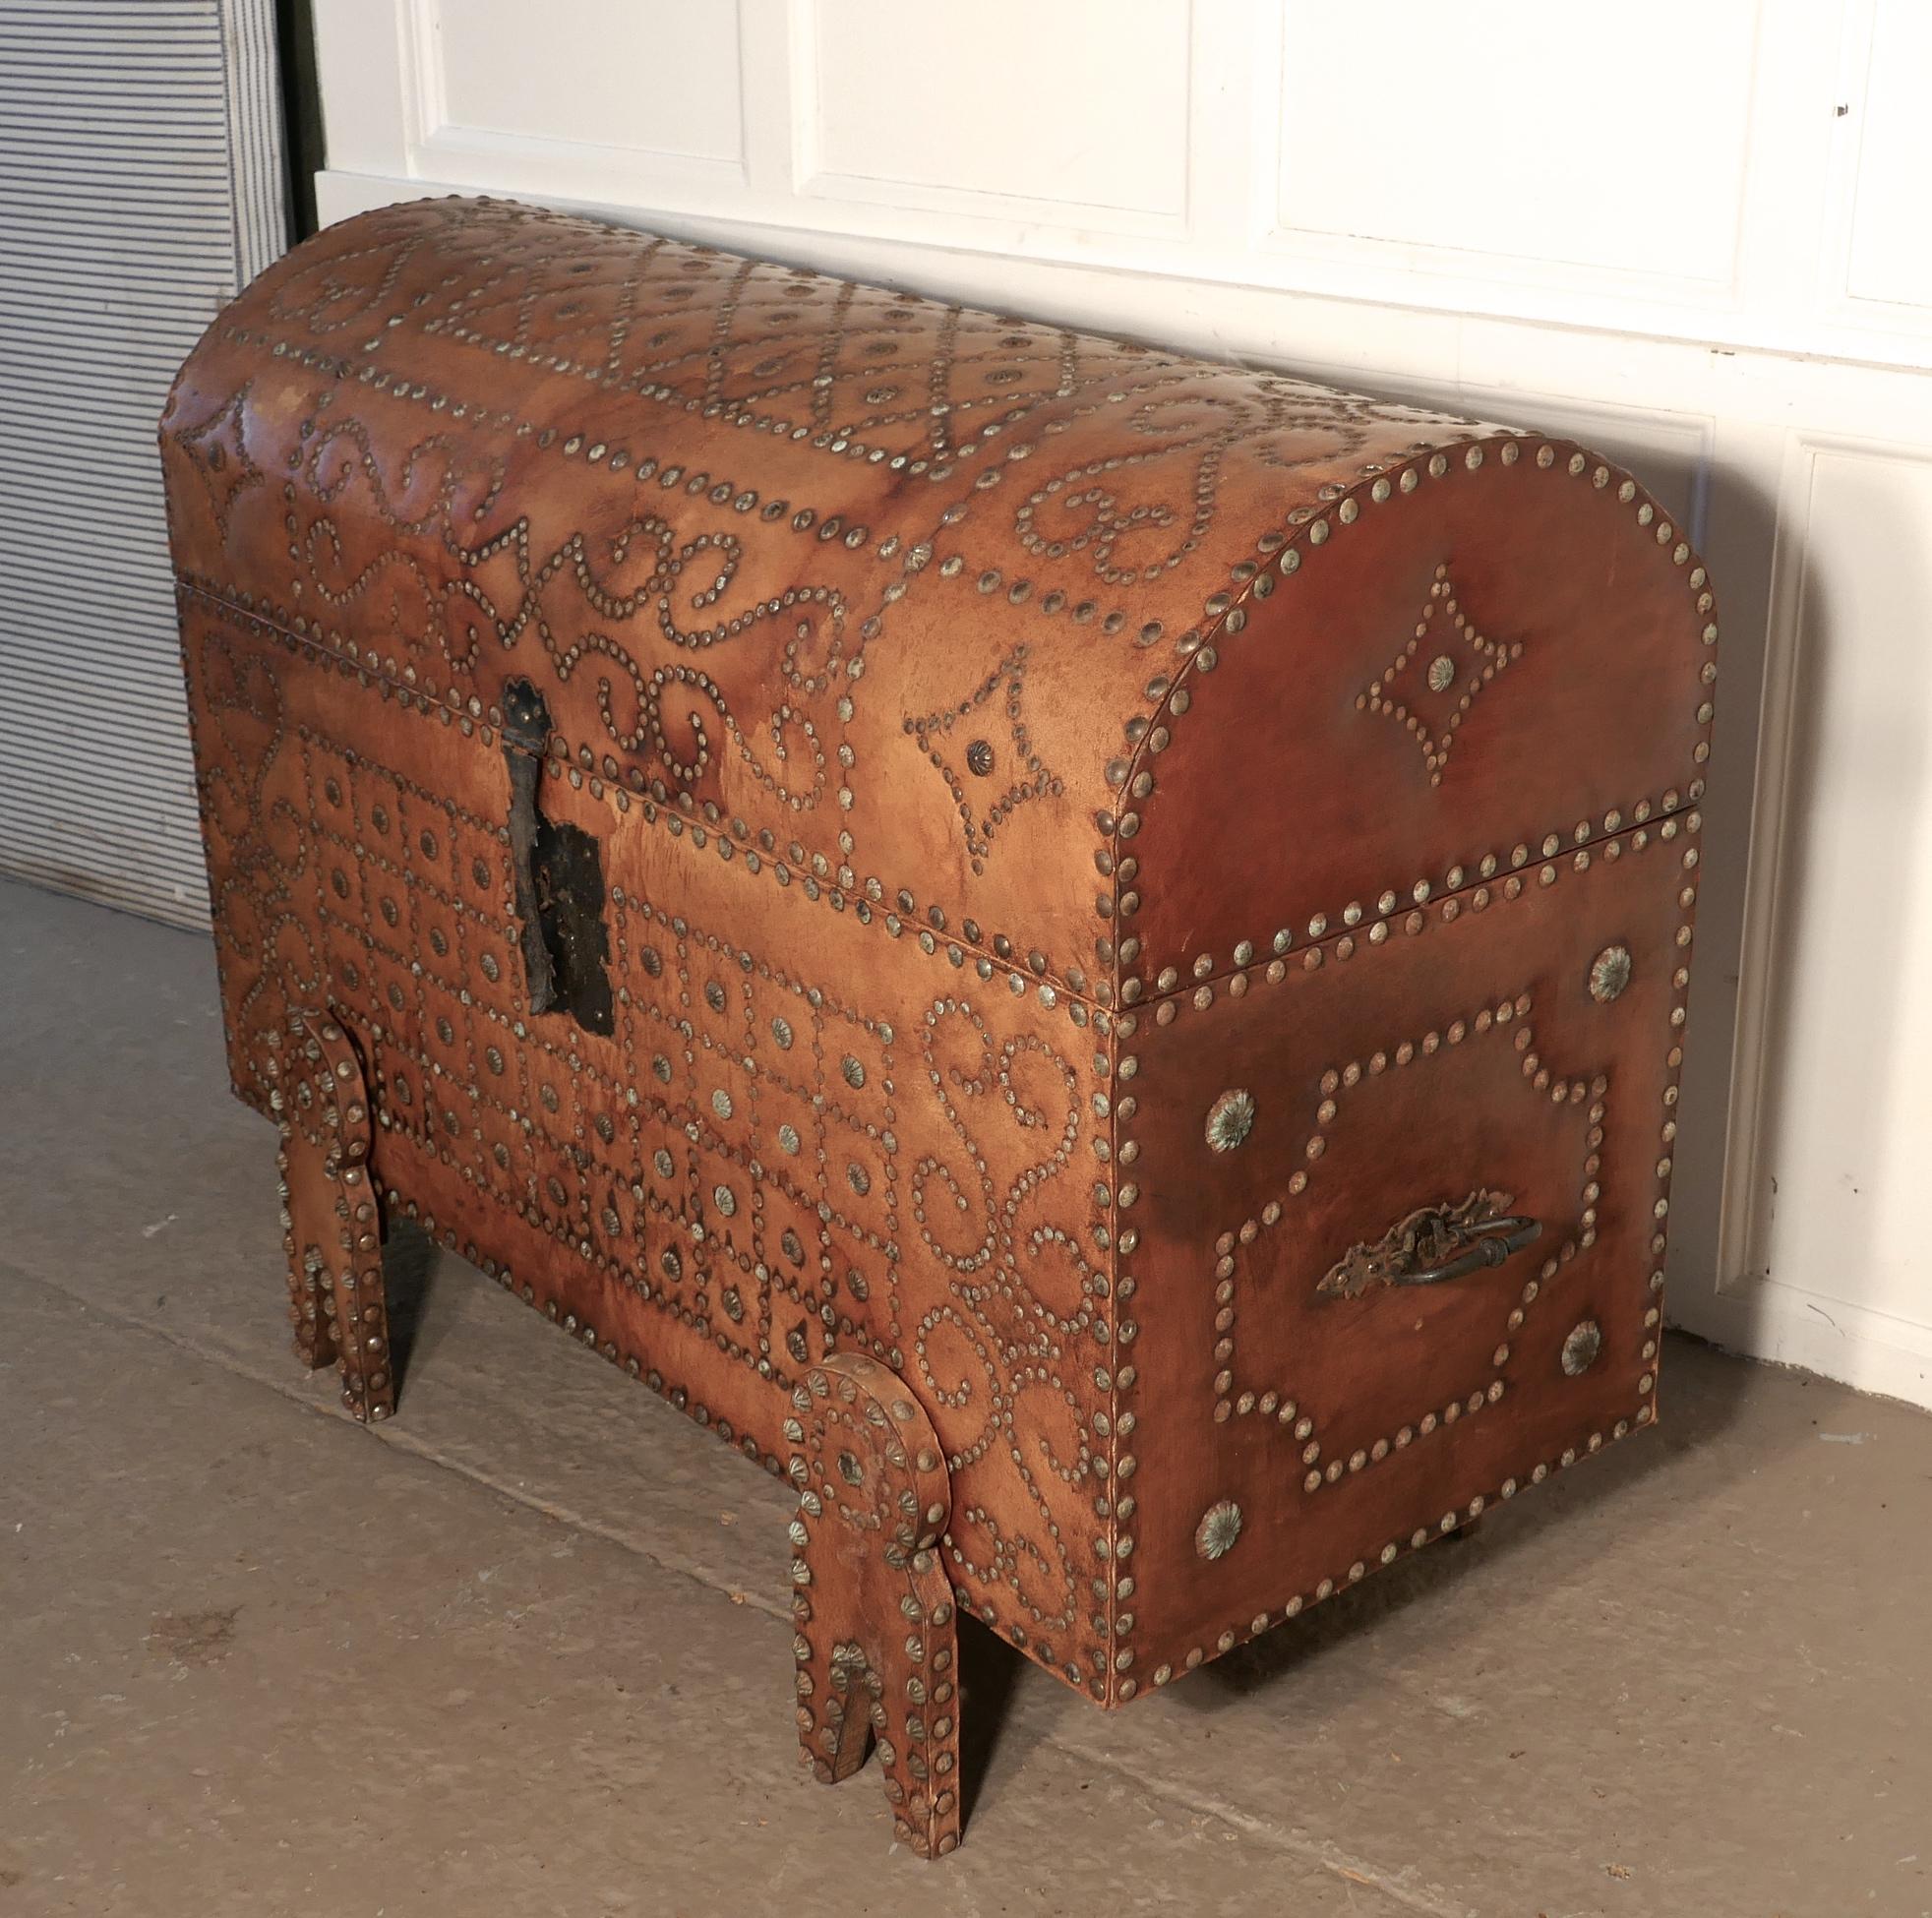 Spanish Dome Top Leather Brass Studded Marriage Chest or Travel Trunk 2